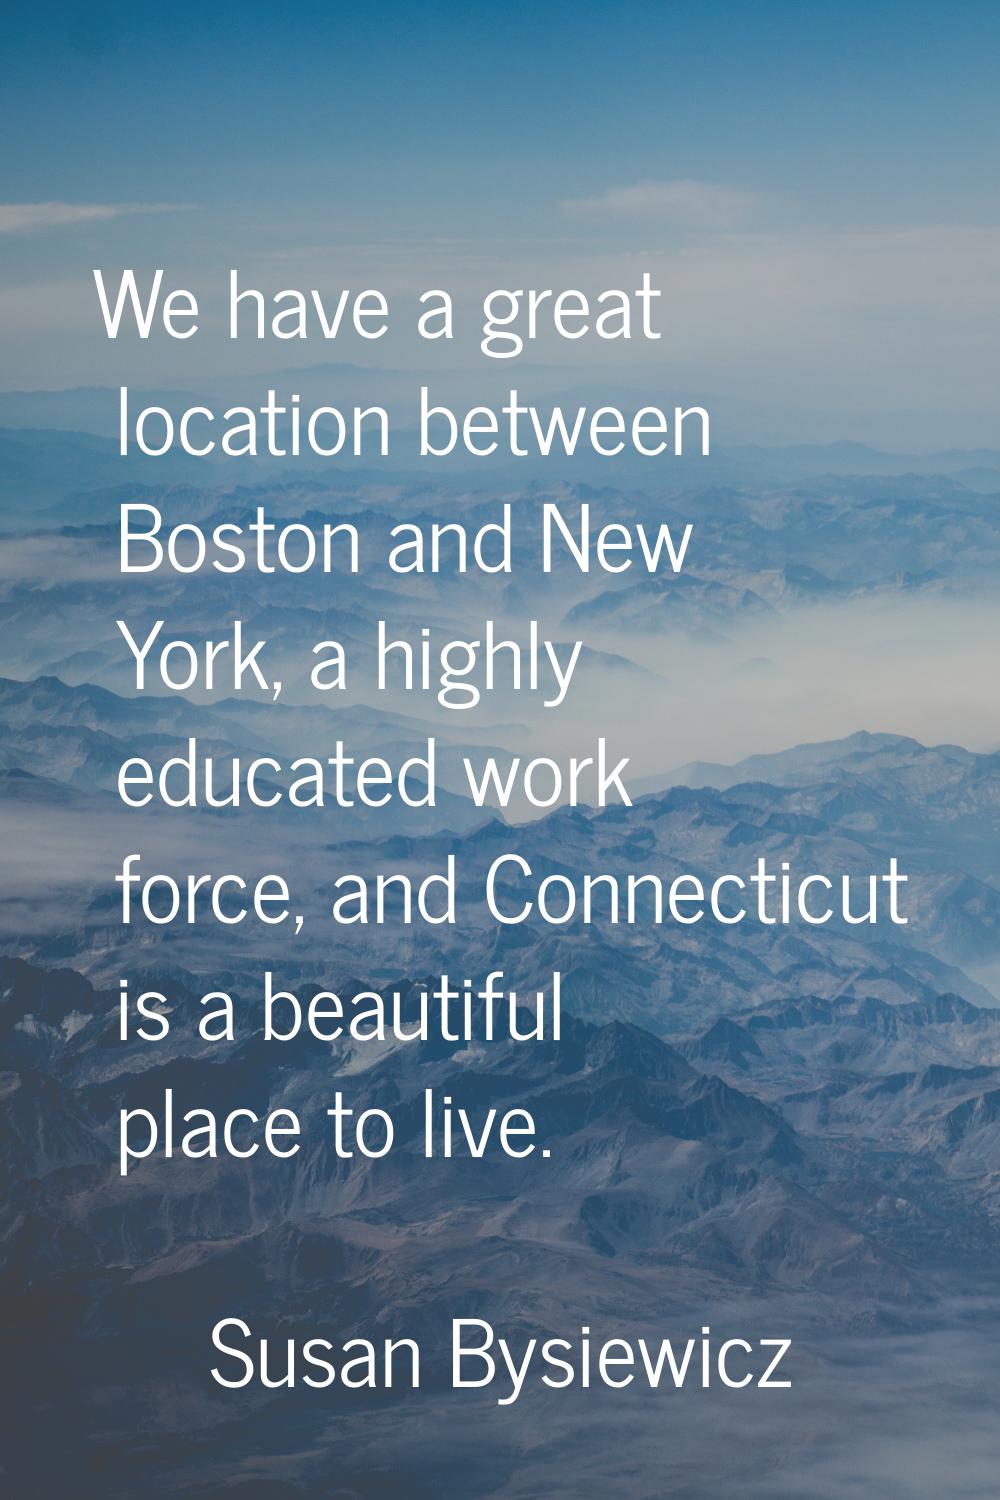 We have a great location between Boston and New York, a highly educated work force, and Connecticut